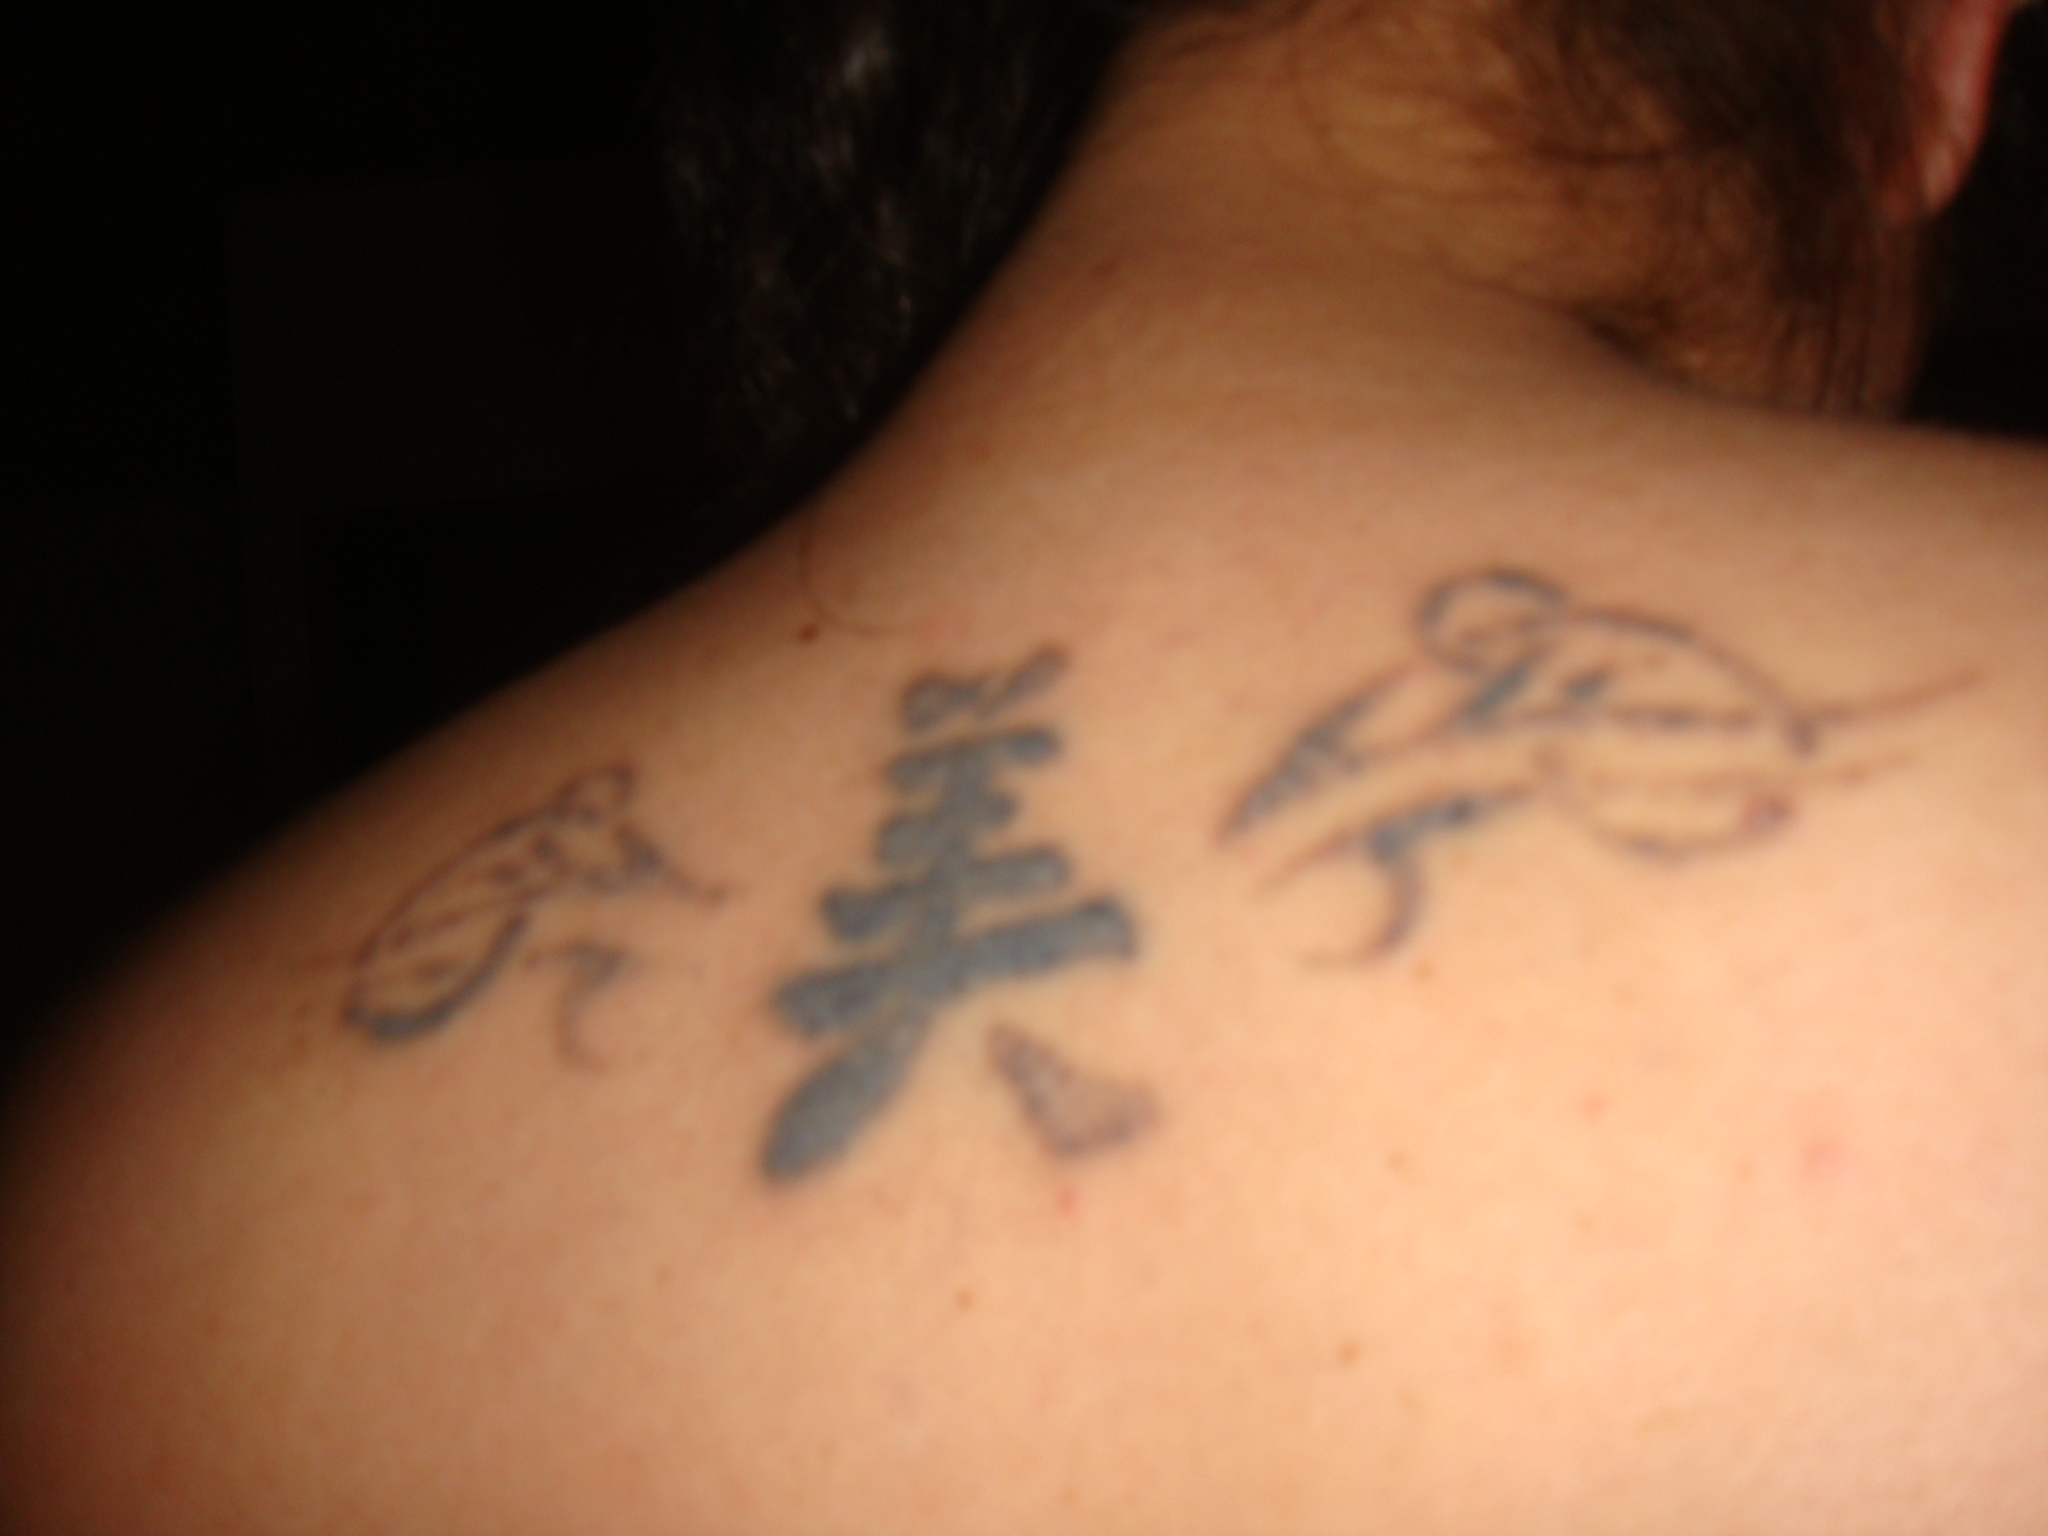 Tat B Gone Tattoo Removal: Review and Testimonial - HubPages